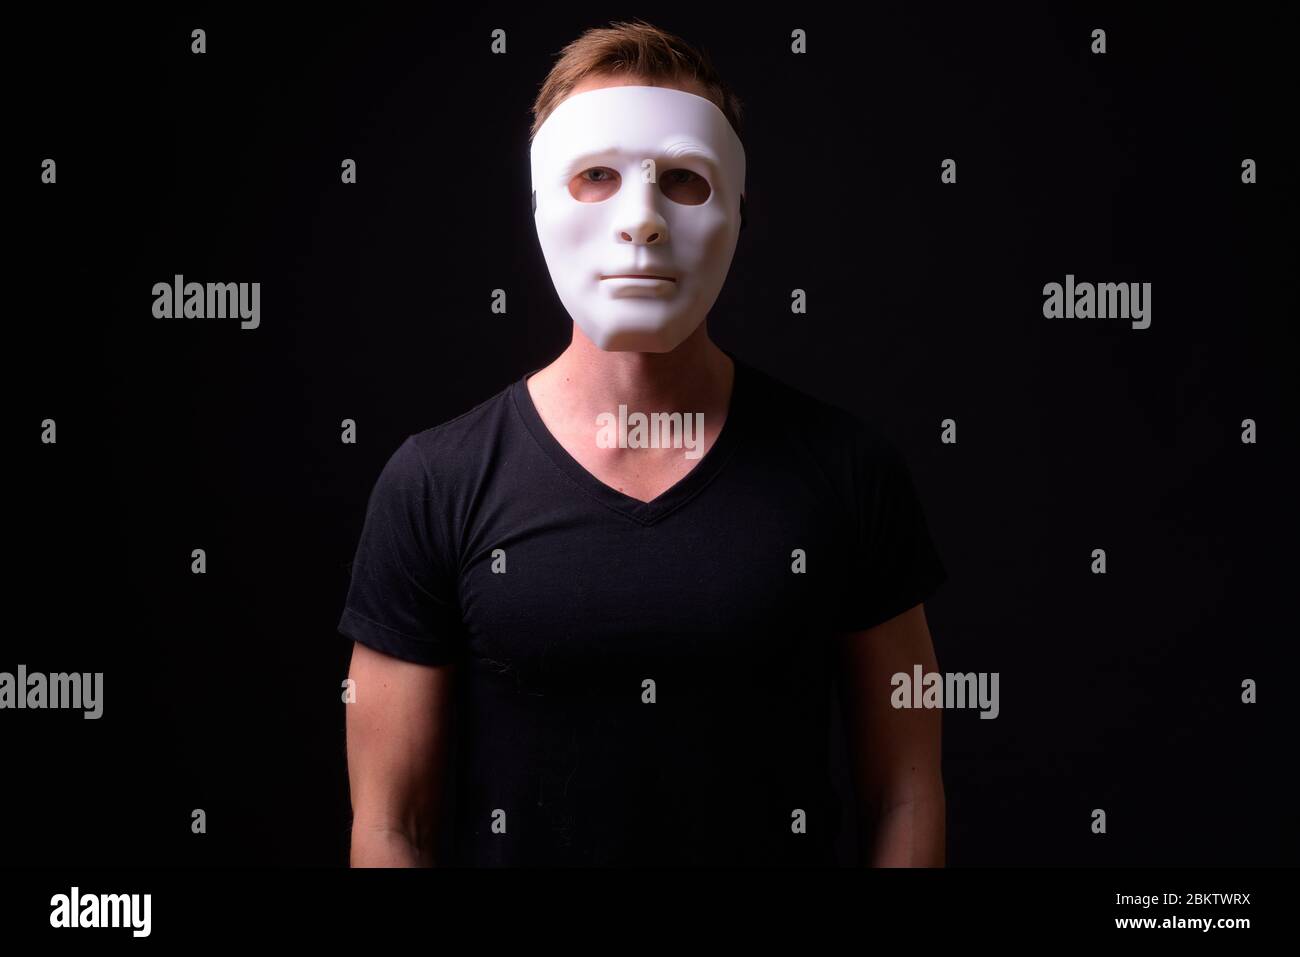 Portrait of young man wearing white mask Stock Photo